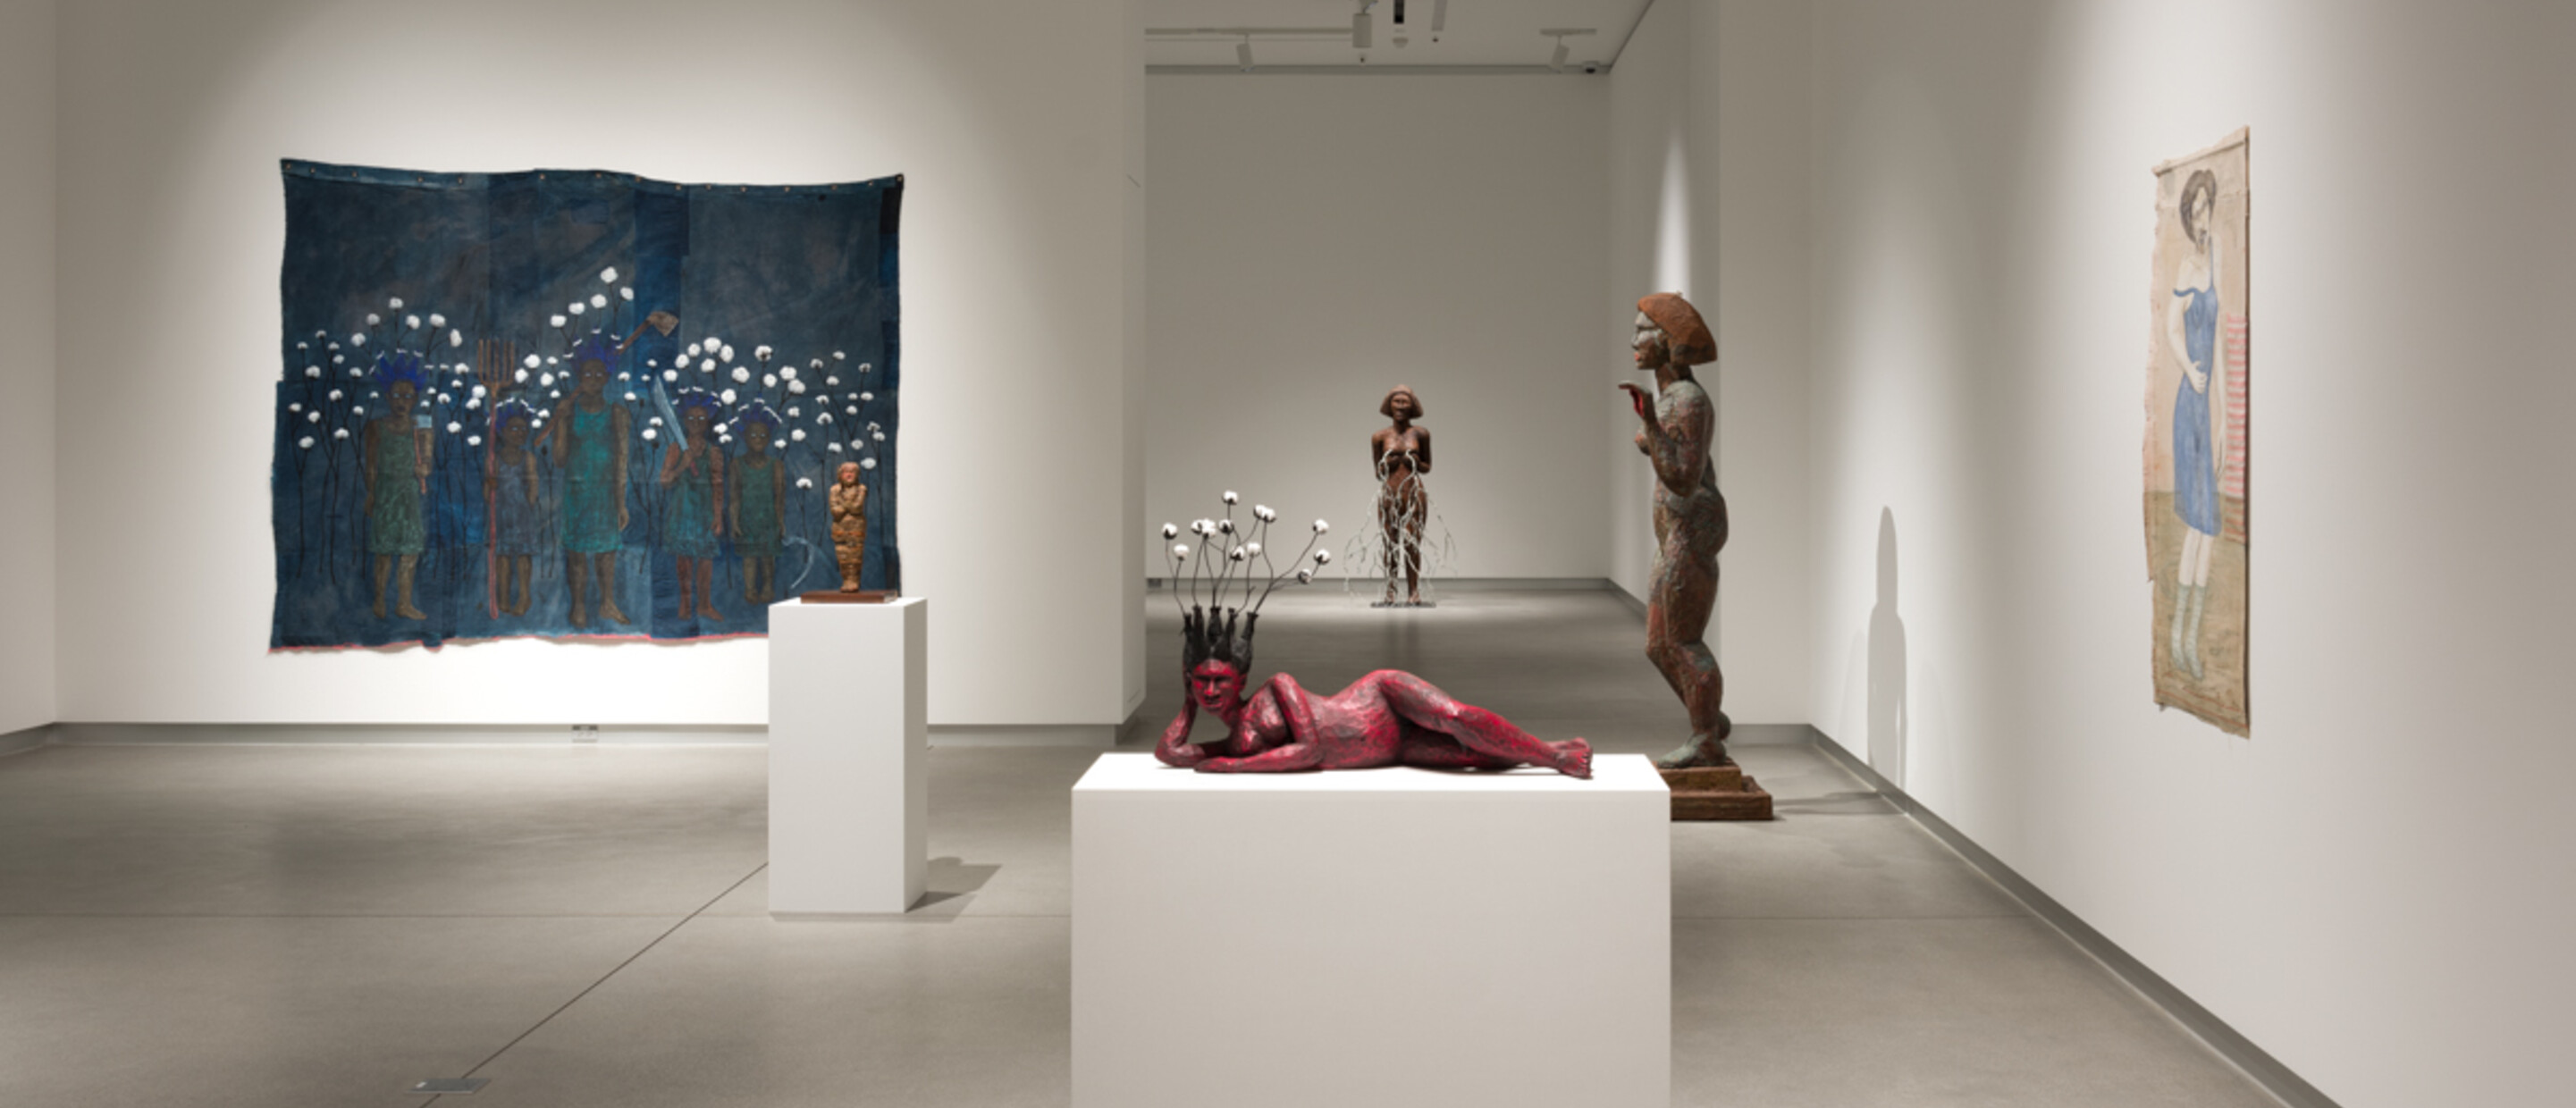 Installation view of 3 dimensional sculptural and 2 dimensional works 